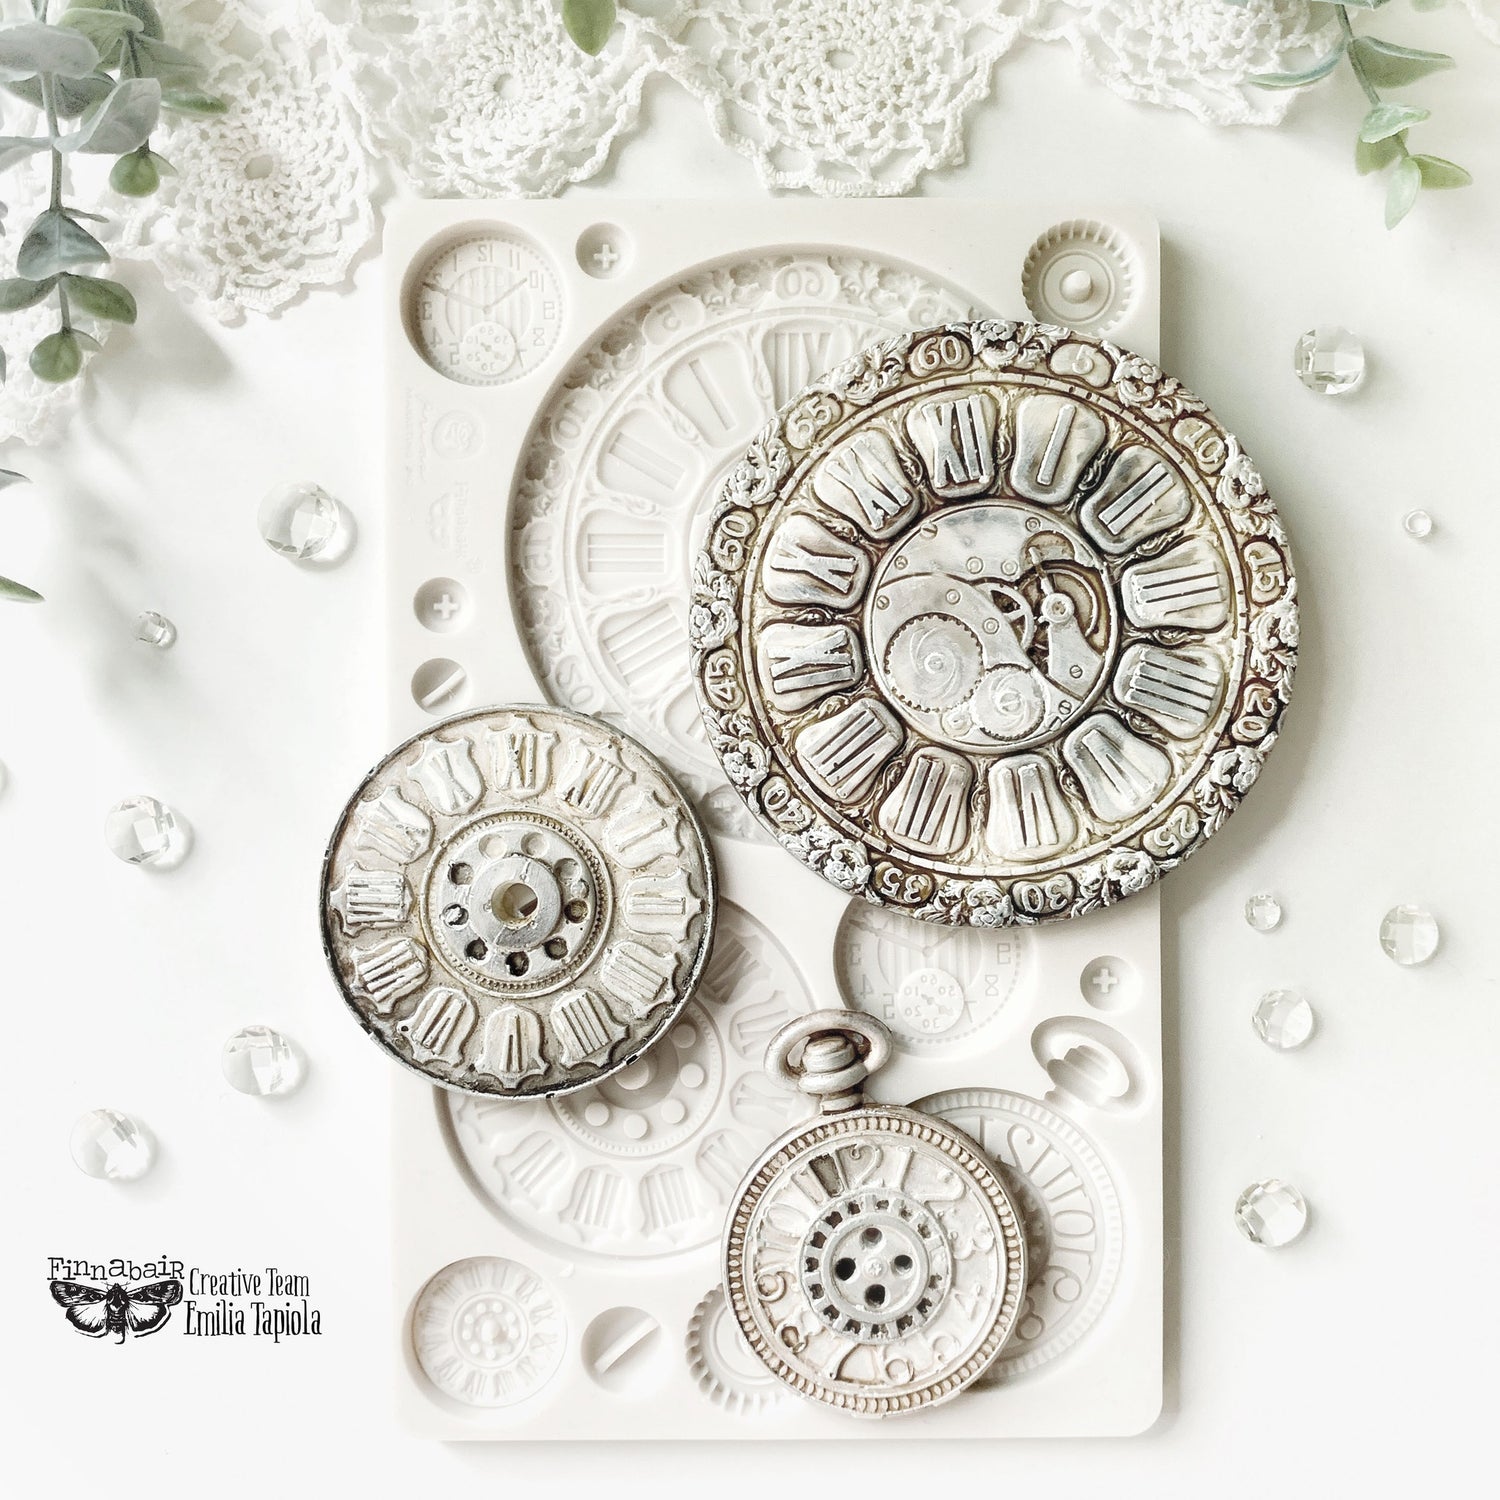 Clock Faces by Finnabair Decor Mould - Same Day Shipping - Redesign Prima - Resin Mold - Candy Mould - Clocks - Decor - Furniture Mould - belleandbeau850